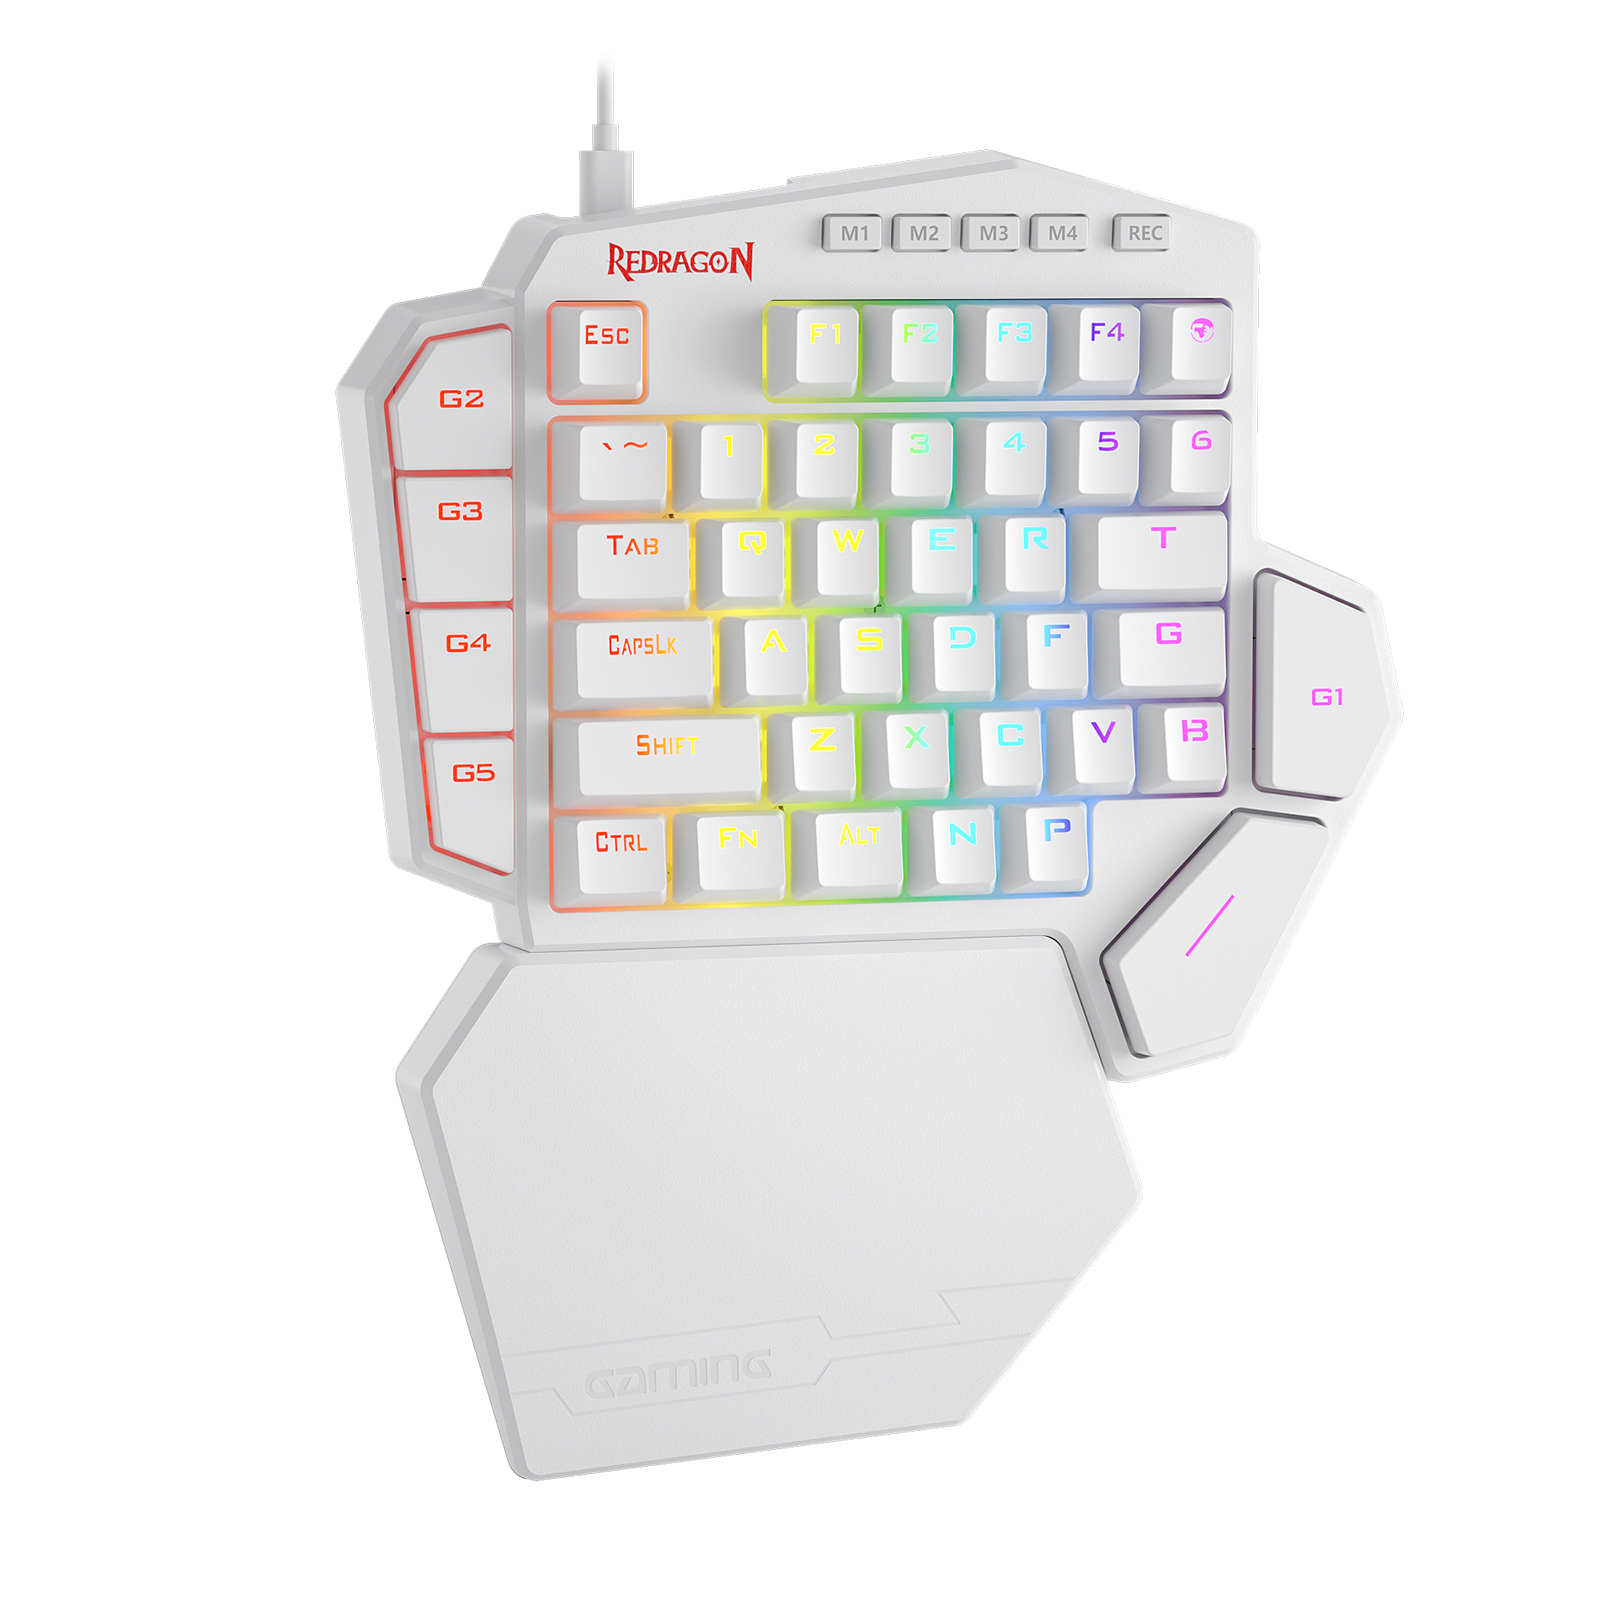 Redragon K585 DITI White One-Handed RGB Mechanical Gaming Keyboard, 42 Keys Gaming Keypad, Hot-Swappable Socket, Detachable Wrist Rest, Brown Switch